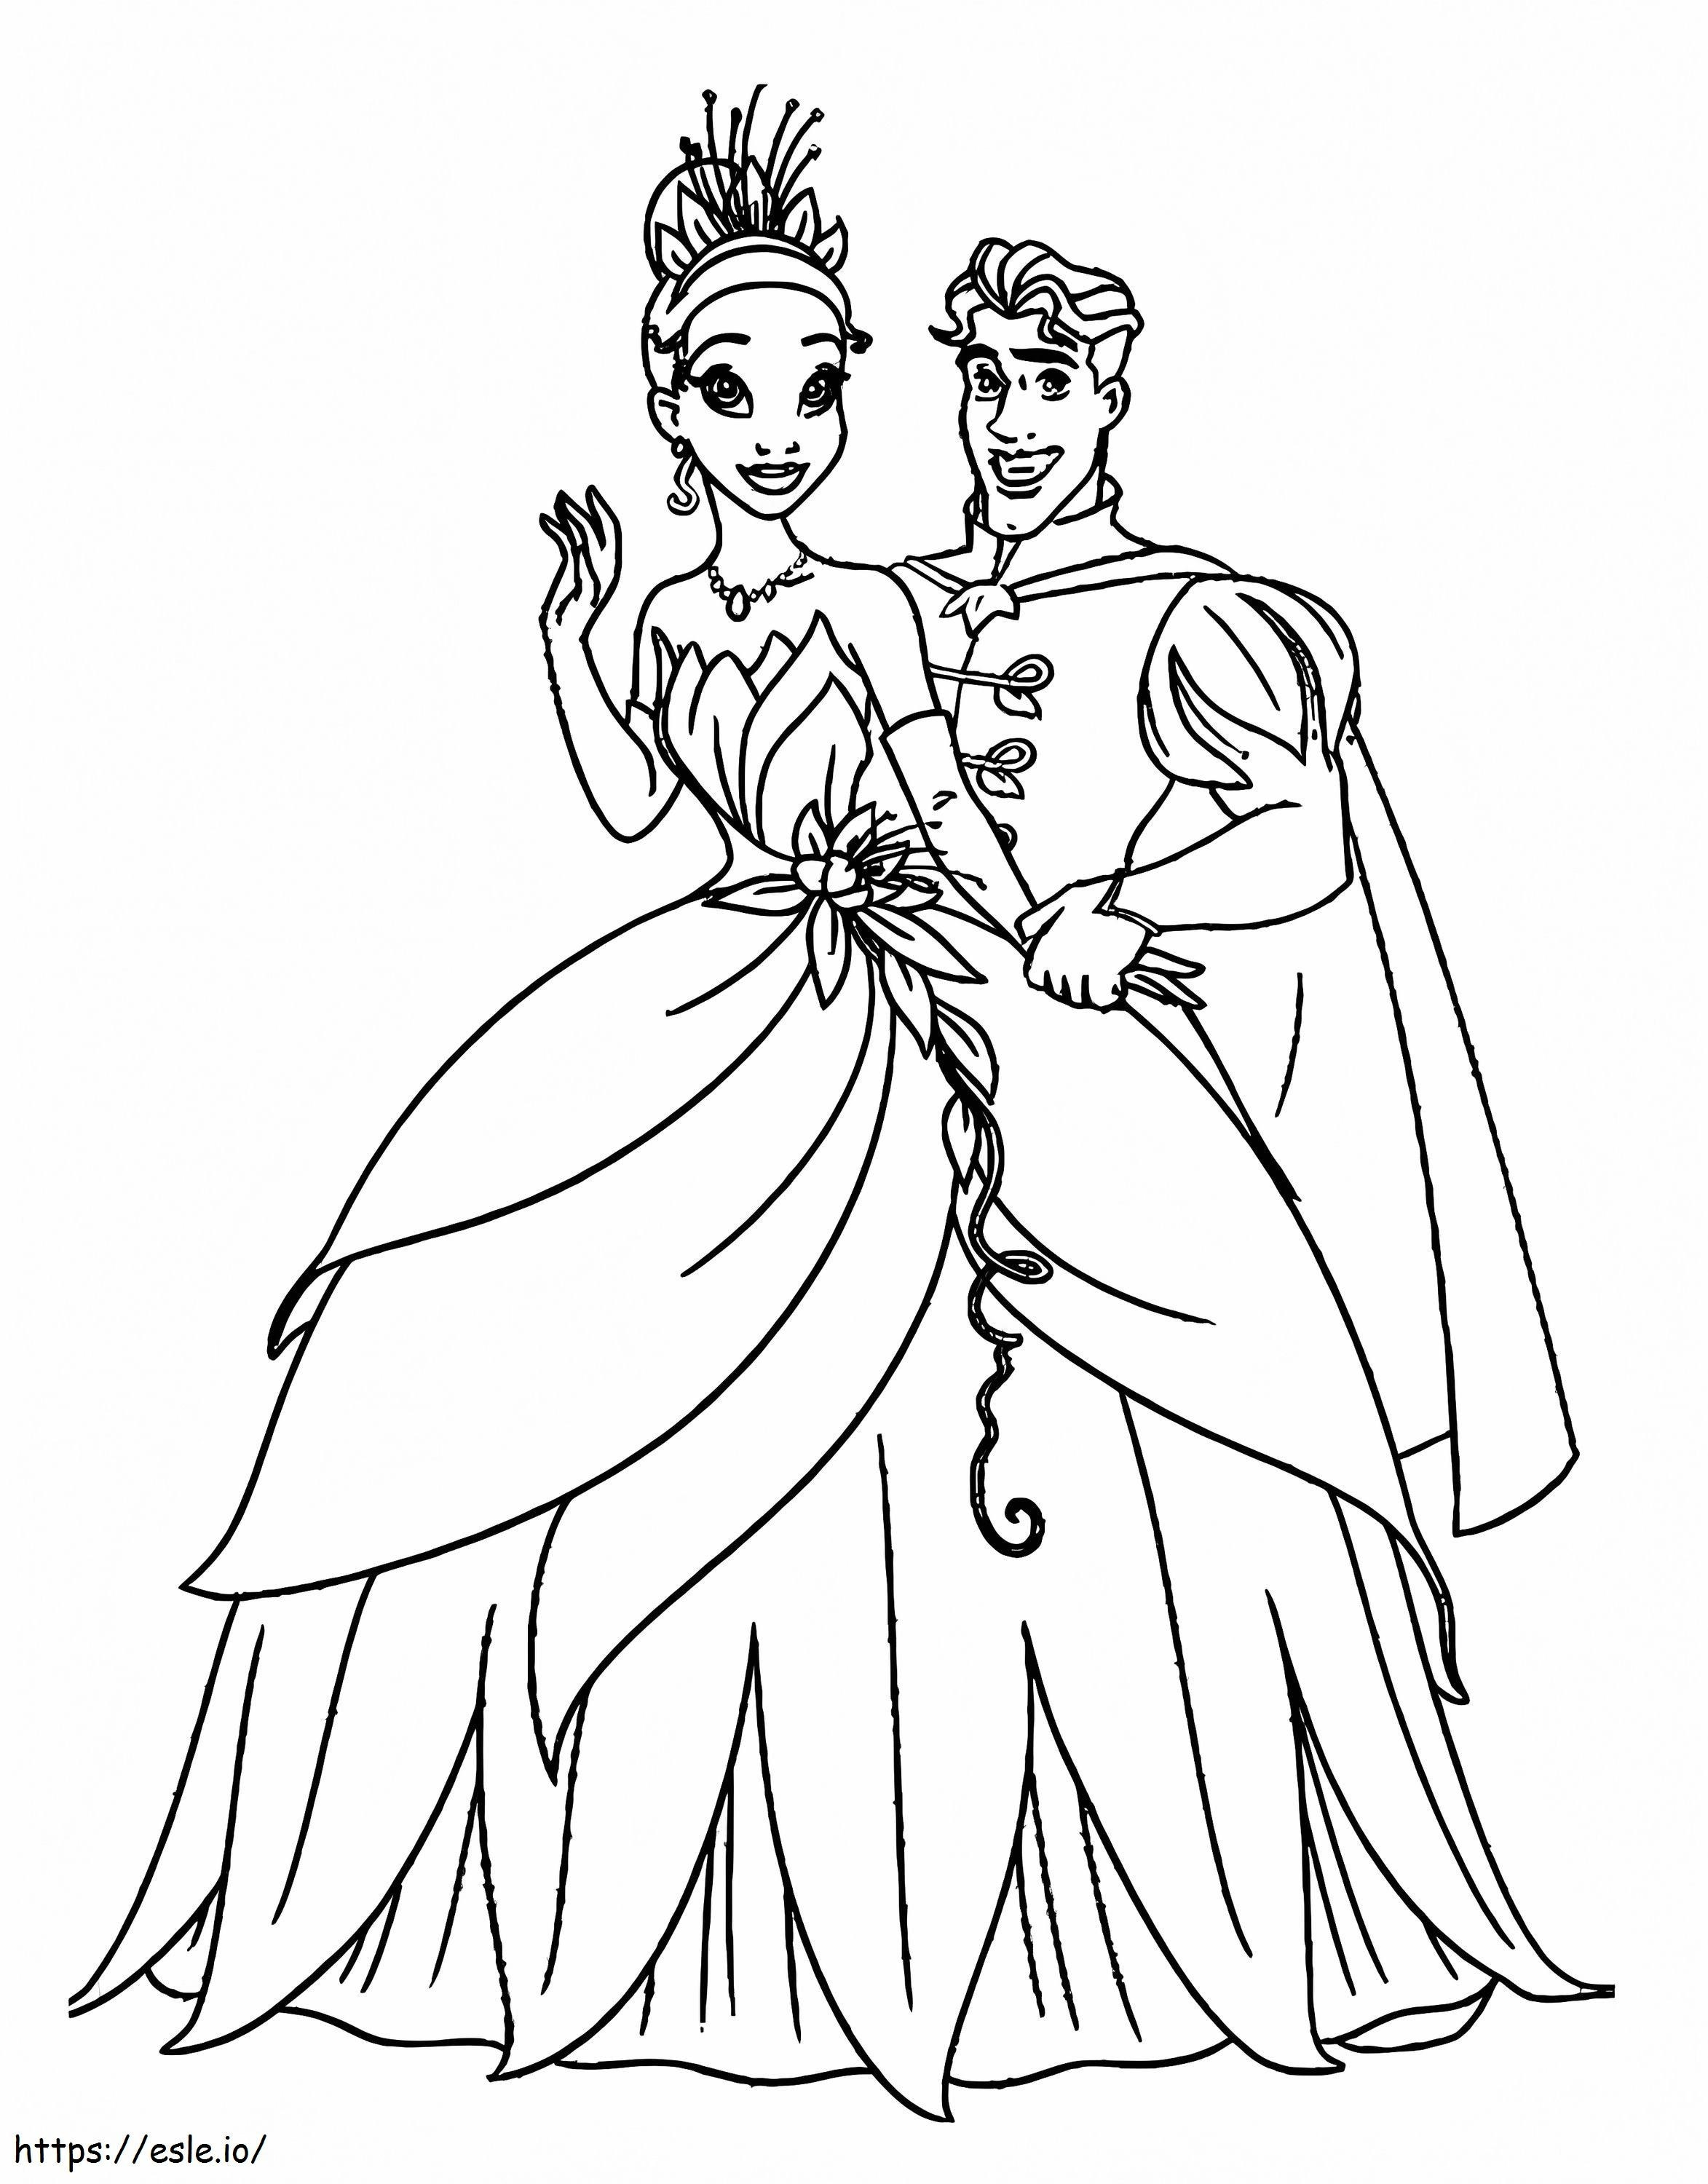 Princess And The Frog 4 coloring page